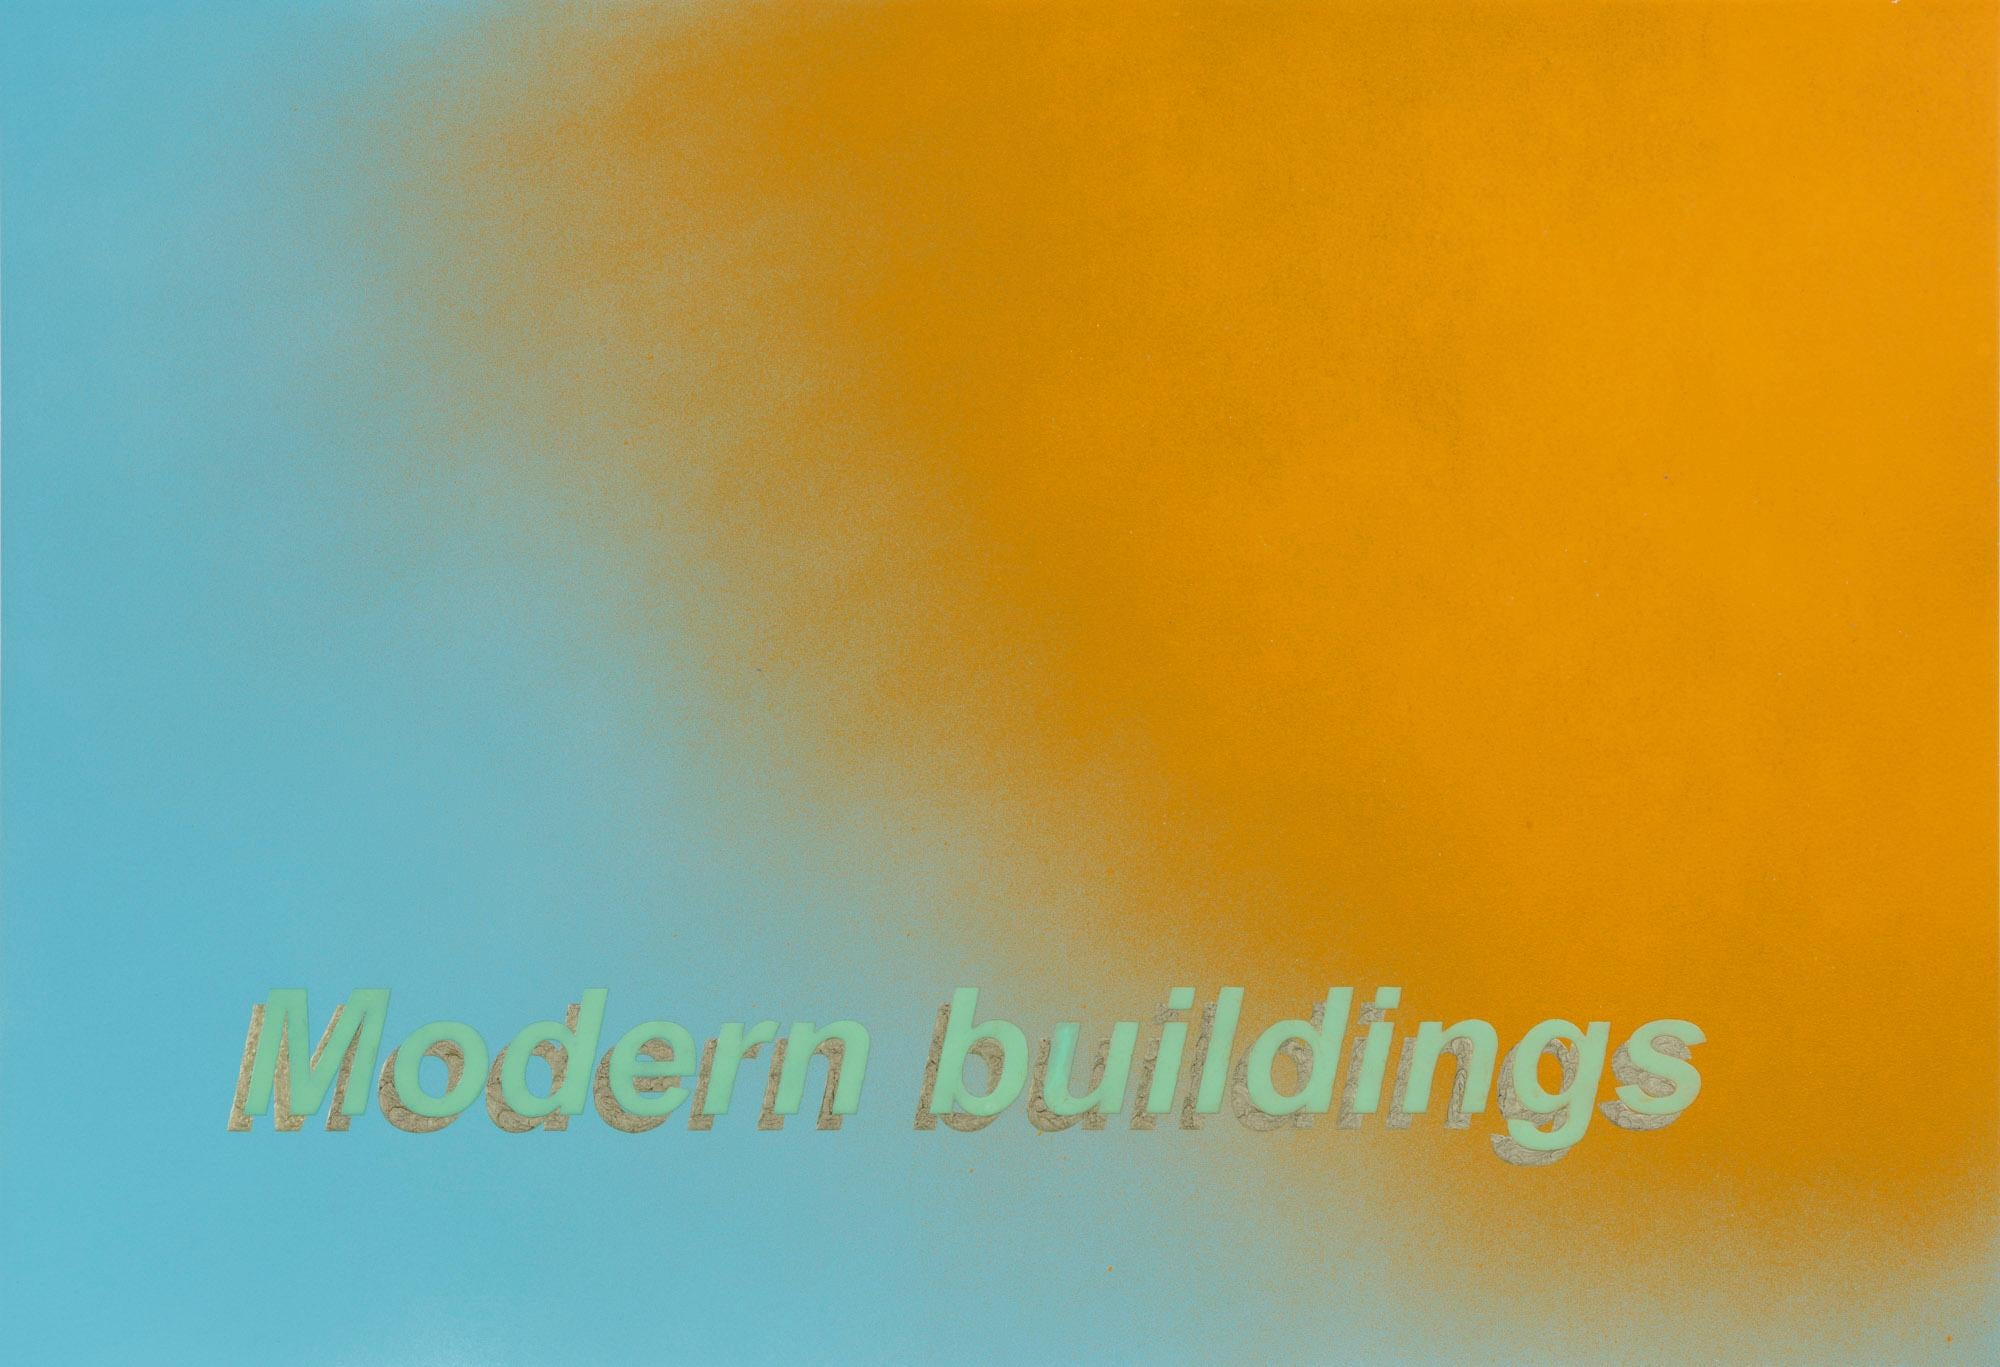 Untitled (Modern buildings), 2018 is a unique contemporary textual painting on paper. The artist first creates a unique background atmosphere with matte spray paint and then meticulously hand-paints text in his material of choice, nail